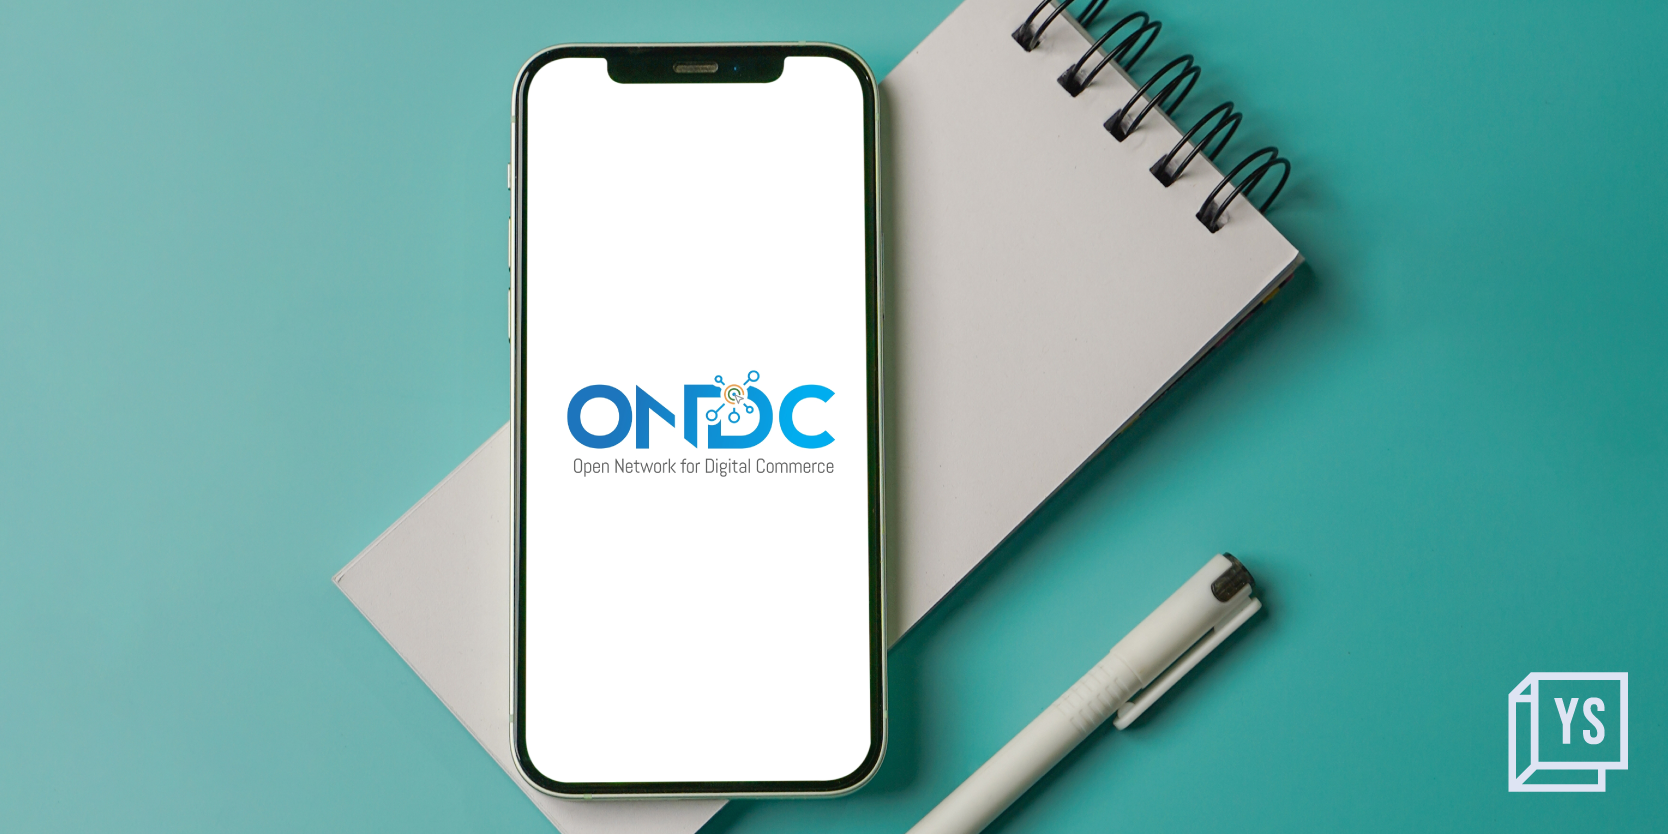 ONDC targets 200K transactions per day by end of 2023: Report